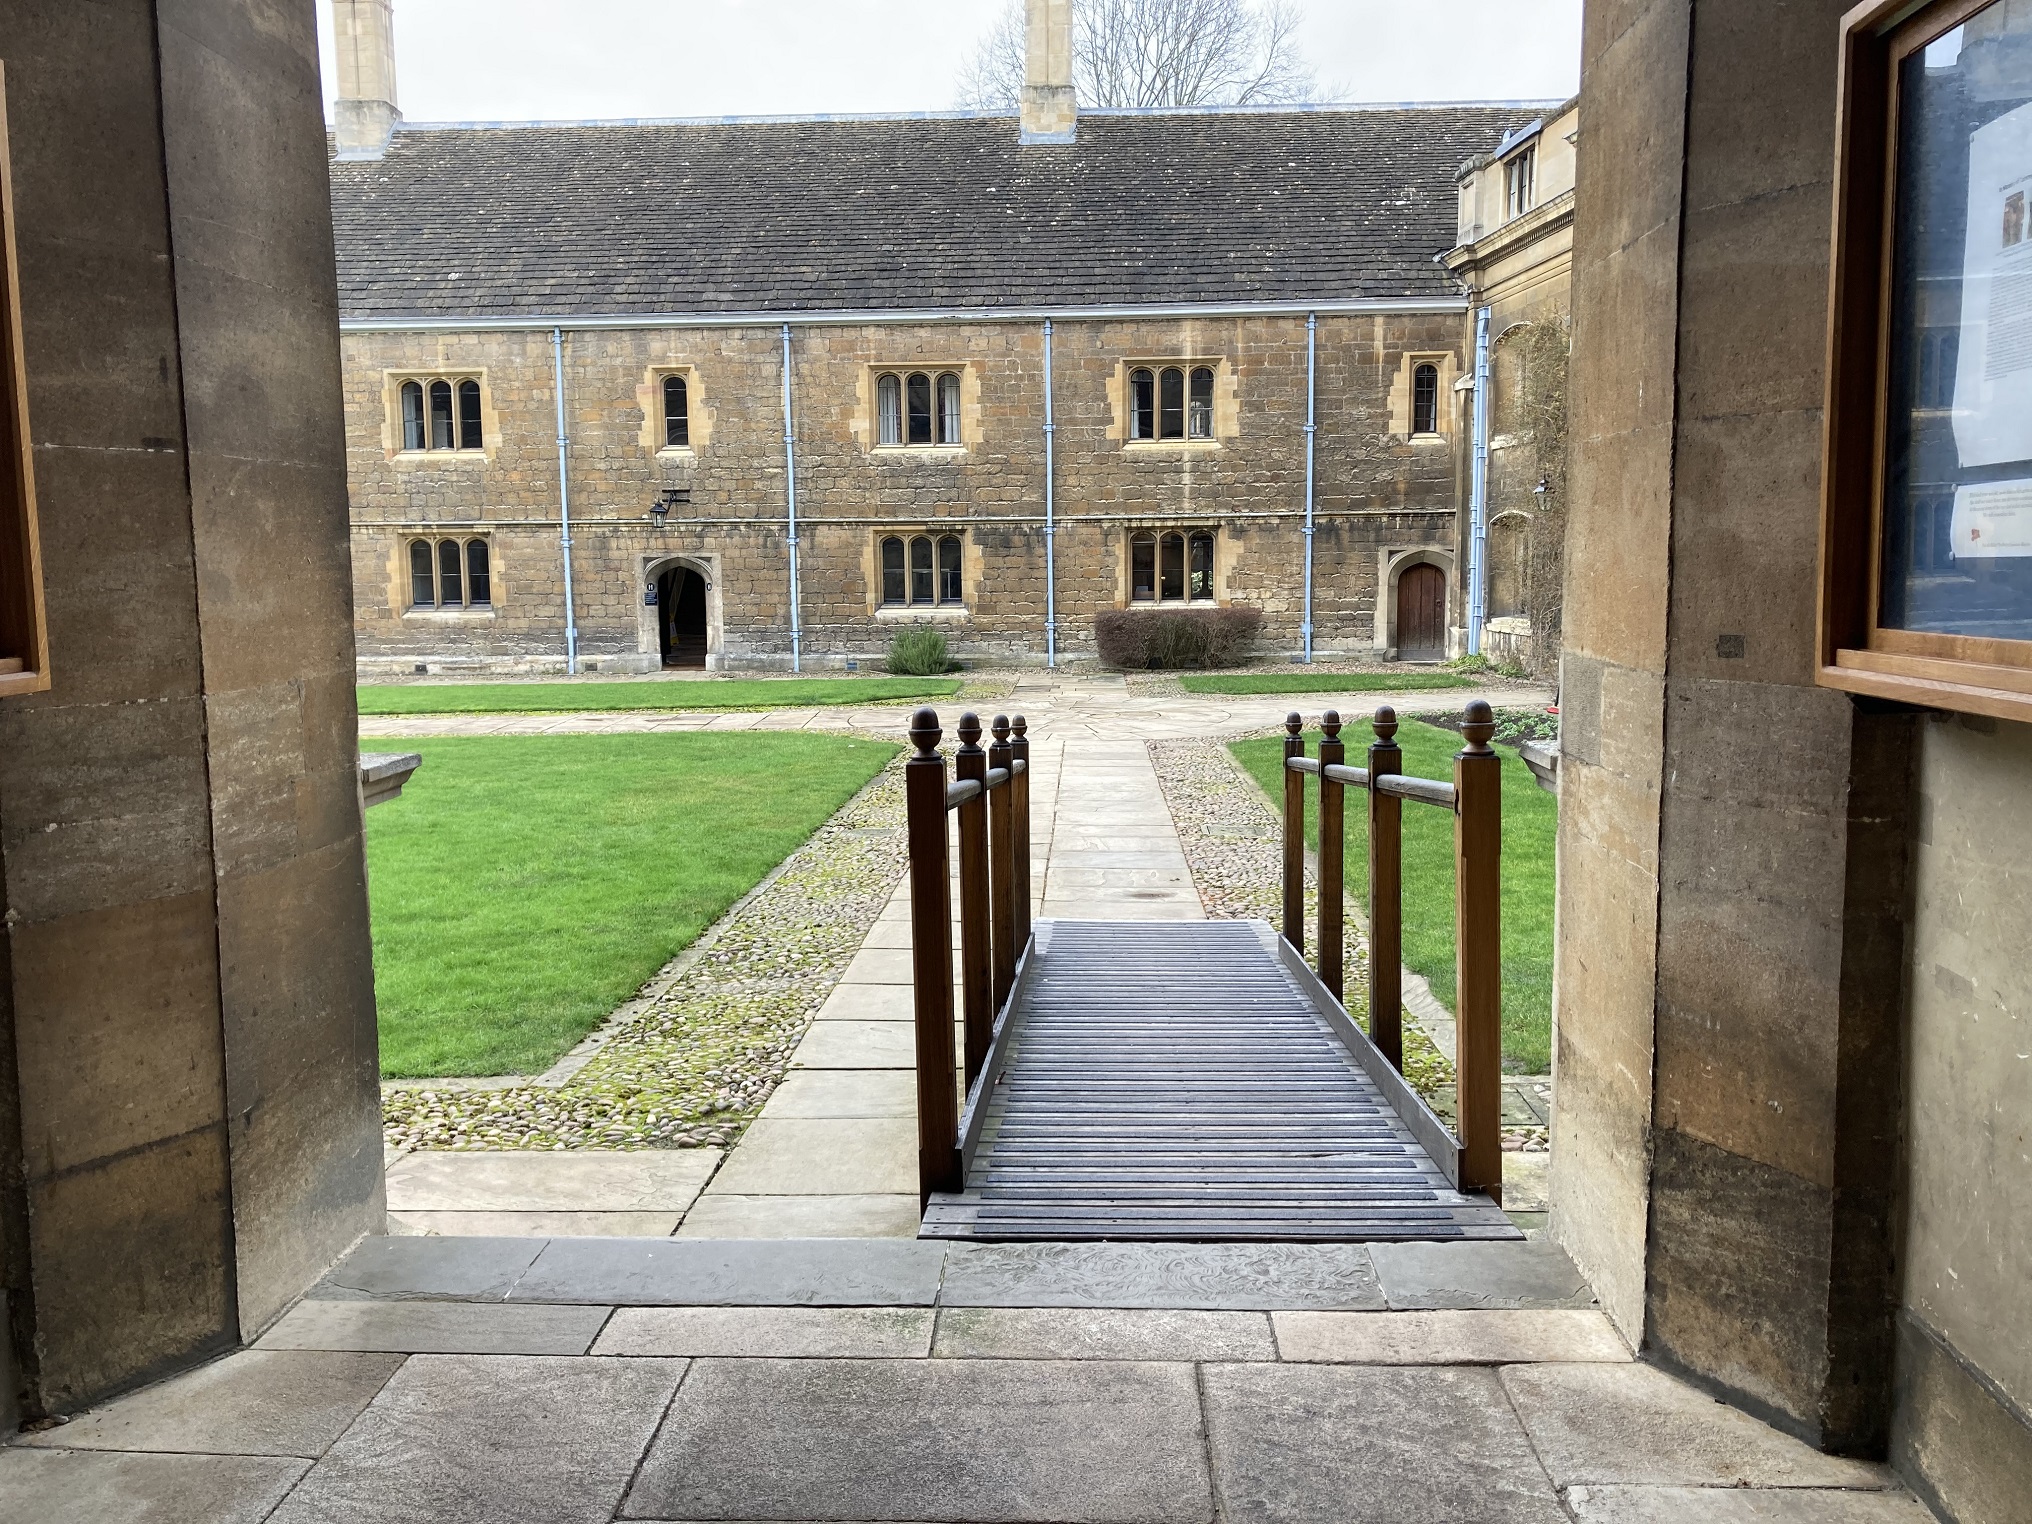 The ramp from Tree Court to Caius Court